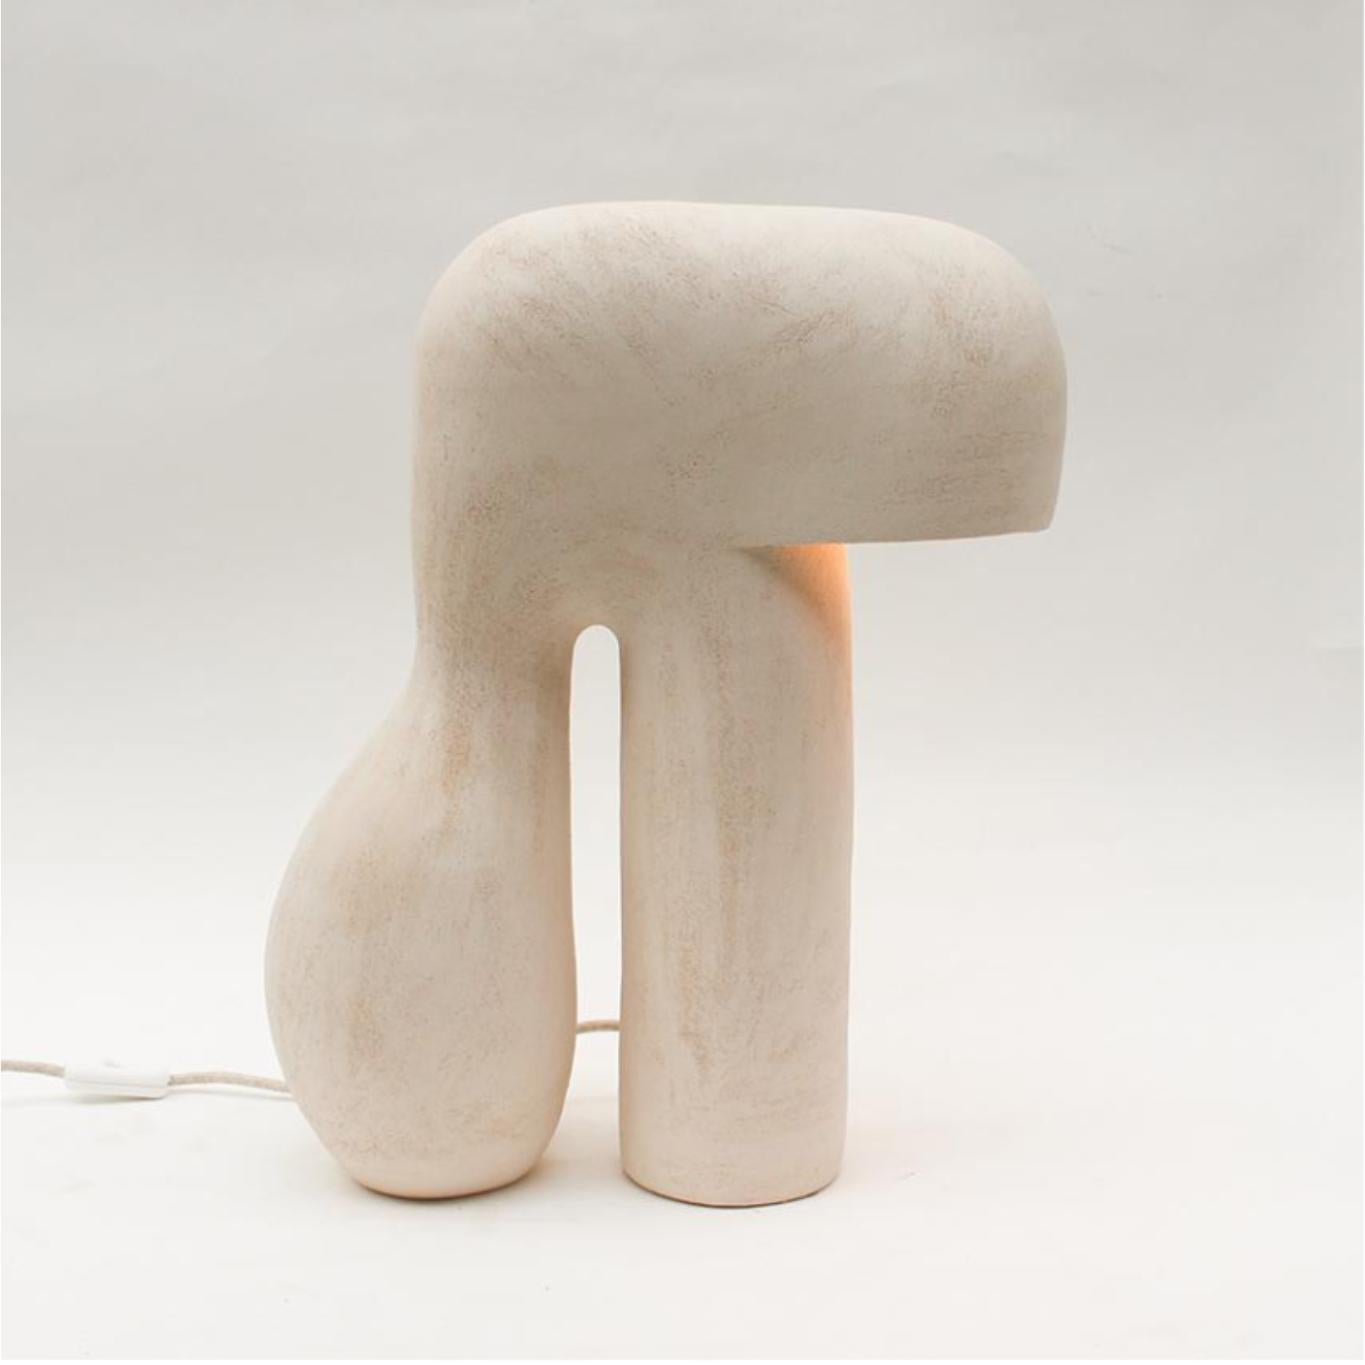 Baume #1 Stoneware lamp by Elisa Uberti
Unique Piece
Dimensions: 15 D x 40 W x H 50 cm
Materials: White Stoneware
This product is handmade, dimensions may vary.

After fifteen years in fashion, Elisa Uberti decides to take the time to work